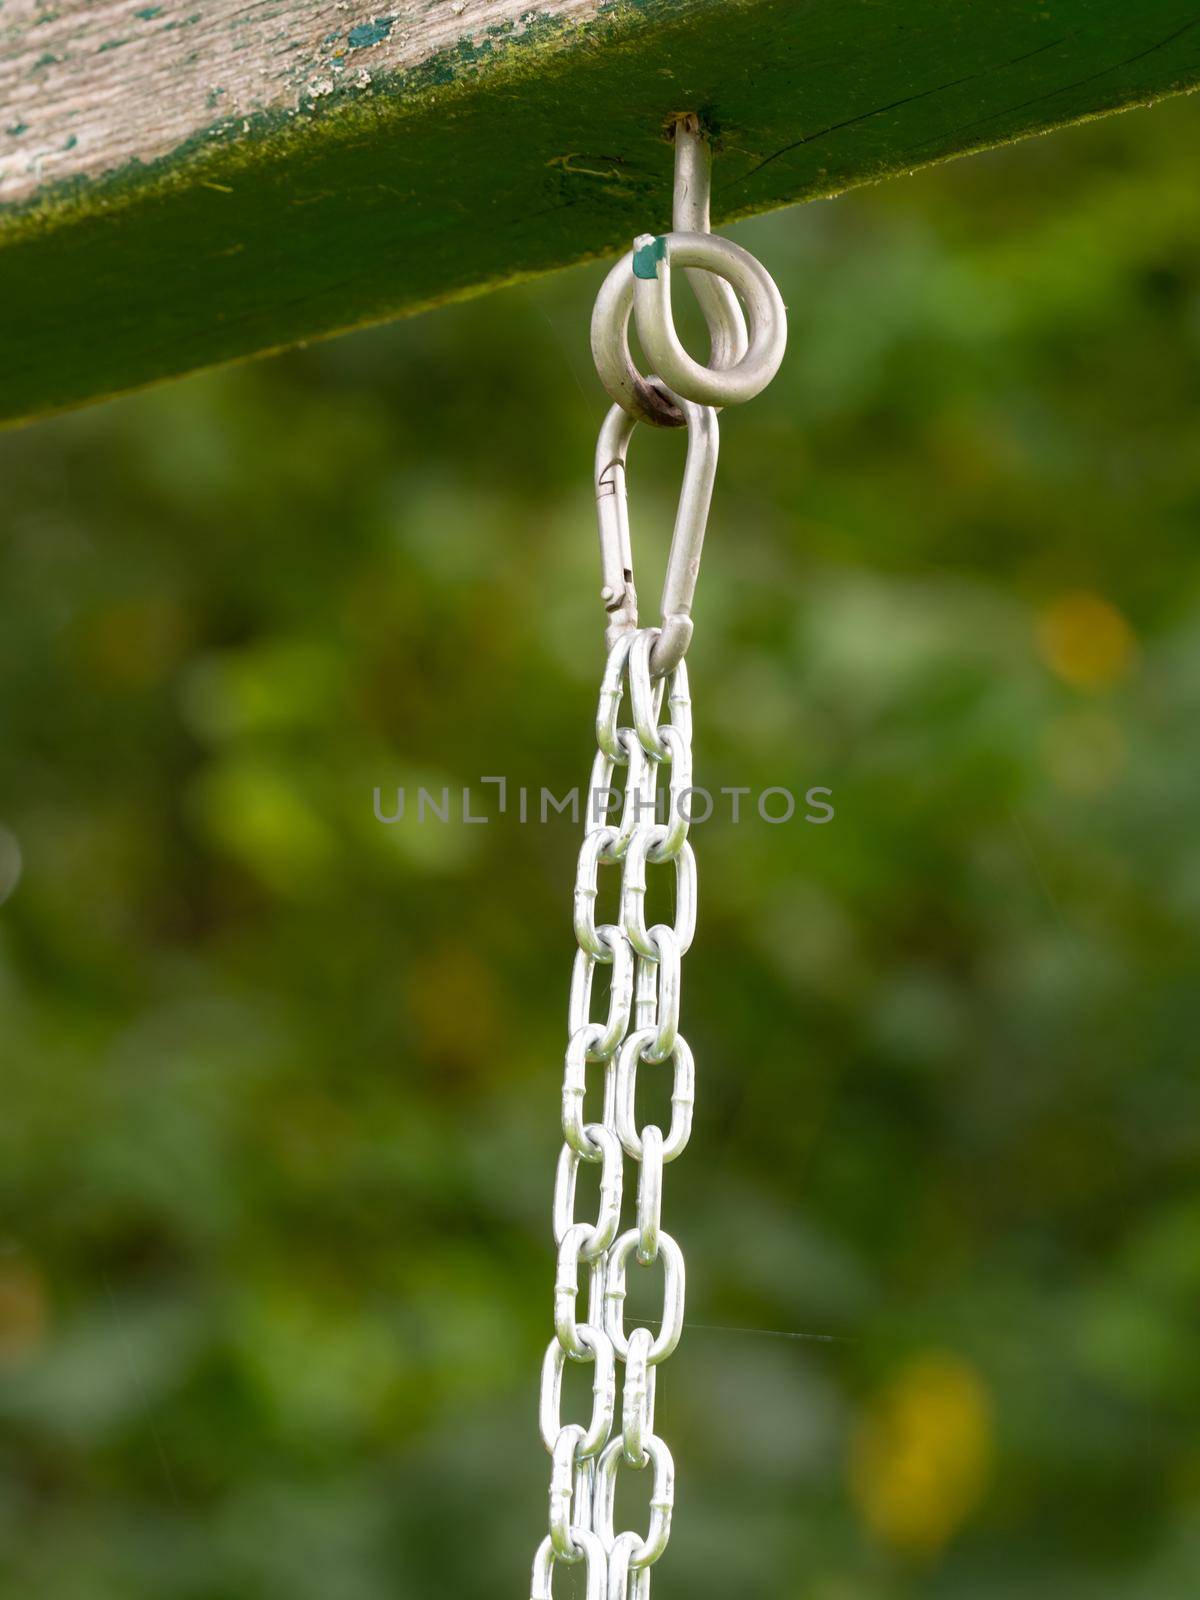 Rope ring knot hanging on wooden beam, trees in background by rdonar2